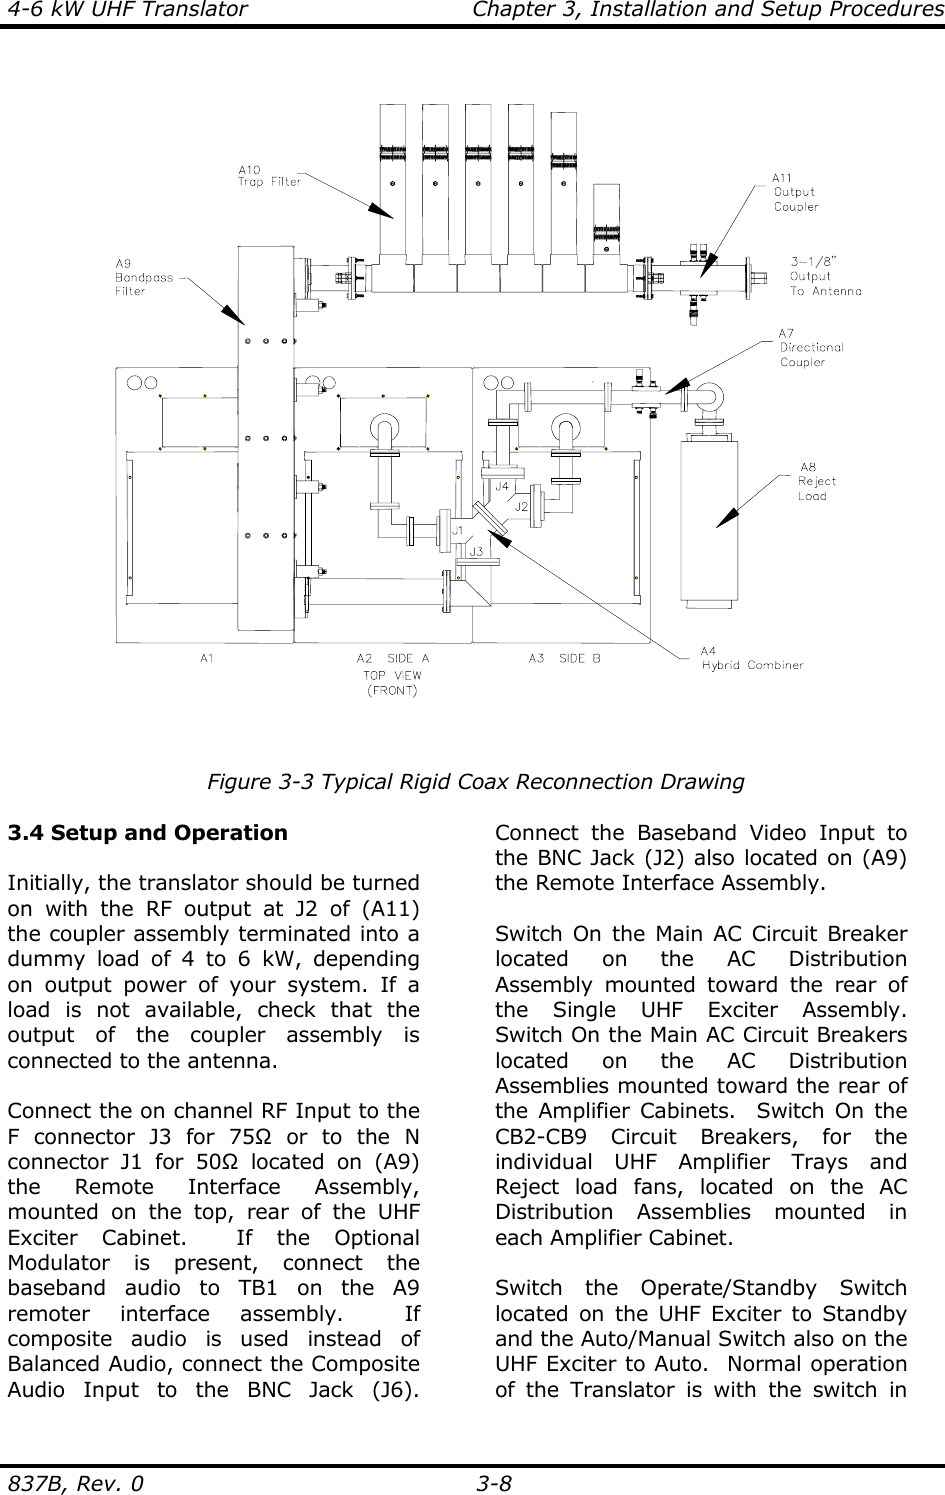 4-6 kW UHF Translator  Chapter 3, Installation and Setup Procedures  837B, Rev. 0 3-8   Figure 3-3 Typical Rigid Coax Reconnection Drawing  3.4 Setup and Operation  Initially, the translator should be turned on with the RF output at J2 of (A11) the coupler assembly terminated into a dummy load of 4 to 6 kW, depending on output power of your system. If a load is not available, check that the output of the coupler assembly is connected to the antenna.  Connect the on channel RF Input to the F connector J3 for 75Ω or to the N connector J1 for 50Ω located on (A9) the Remote Interface Assembly, mounted on the top, rear of the UHF Exciter Cabinet.  If the Optional Modulator is present, connect the baseband audio to TB1 on the A9 remoter interface assembly.  If composite audio is used instead of Balanced Audio, connect the Composite Audio Input to the BNC Jack (J6).  Connect the Baseband Video Input to the BNC Jack (J2) also located on (A9) the Remote Interface Assembly.  Switch On the Main AC Circuit Breaker located on the AC Distribution Assembly mounted toward the rear of the Single UHF Exciter Assembly.  Switch On the Main AC Circuit Breakers located on the AC Distribution Assemblies mounted toward the rear of the Amplifier Cabinets.  Switch On the CB2-CB9 Circuit Breakers, for the individual UHF Amplifier Trays and Reject load fans, located on the AC Distribution Assemblies mounted in each Amplifier Cabinet.  Switch the Operate/Standby Switch located on the UHF Exciter to Standby and the Auto/Manual Switch also on the UHF Exciter to Auto.  Normal operation of the Translator is with the switch in 